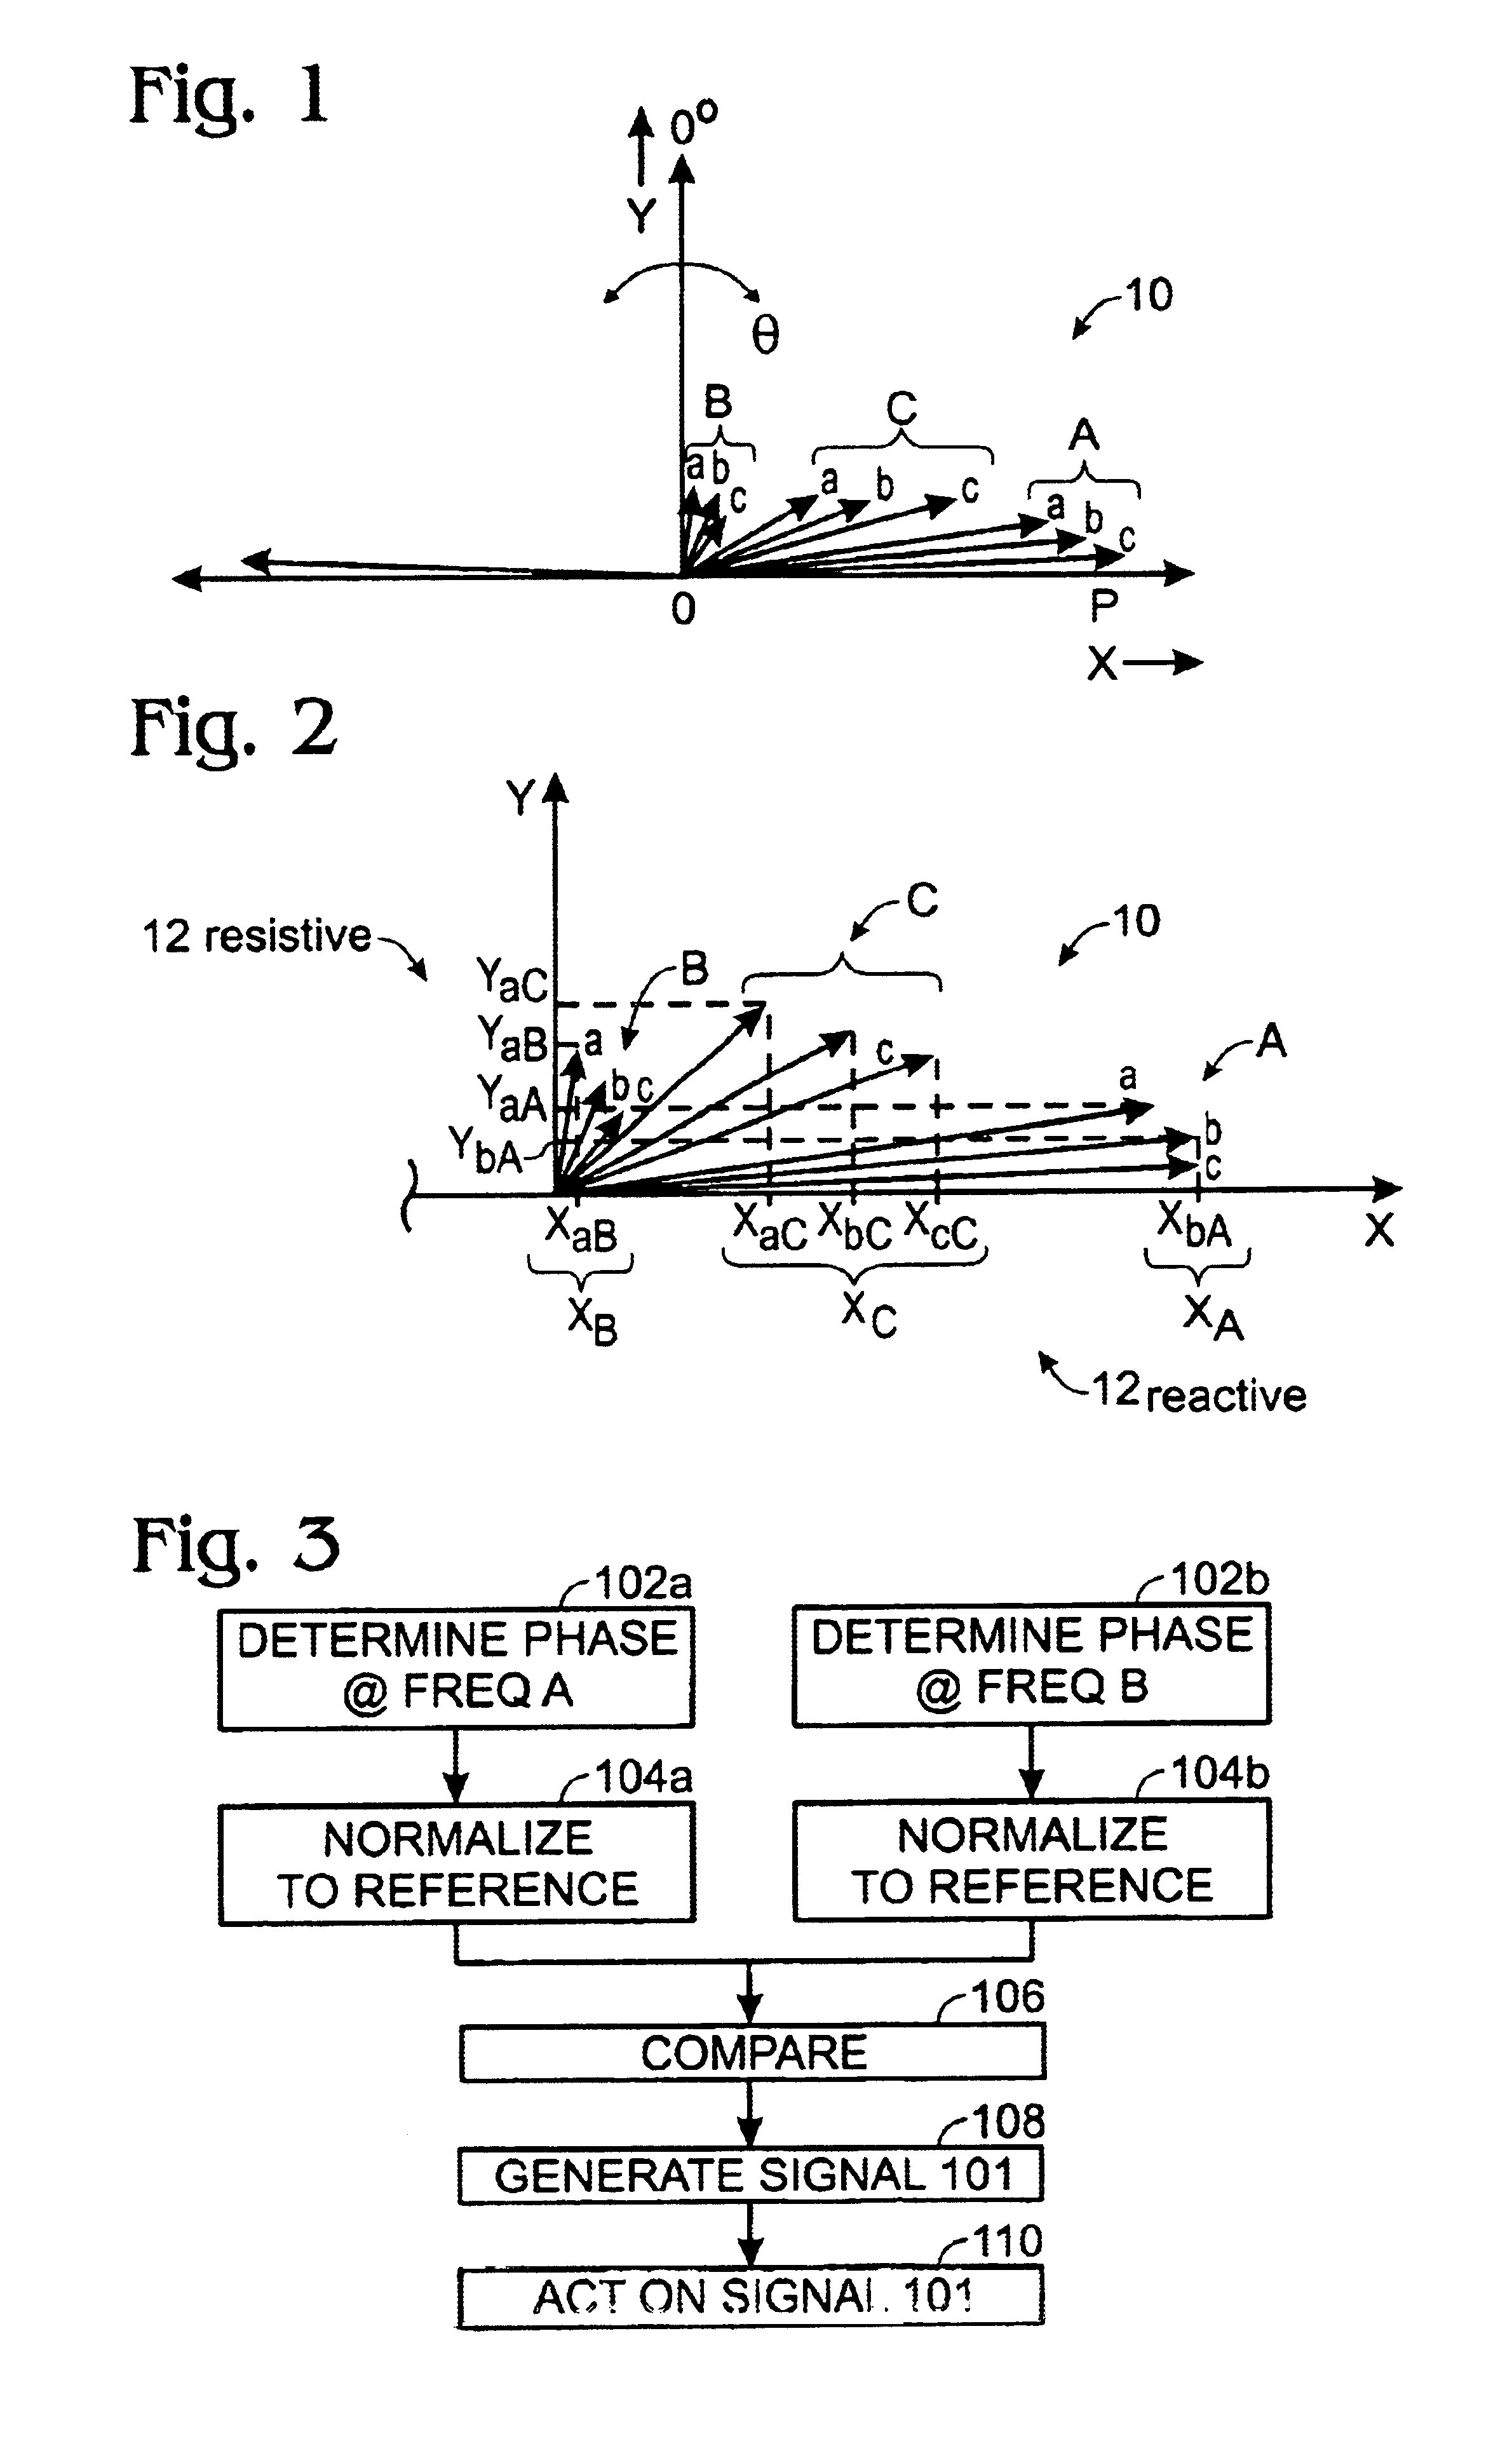 Method and apparatus for distinguishing metal objects employing multiple frequency interrogation